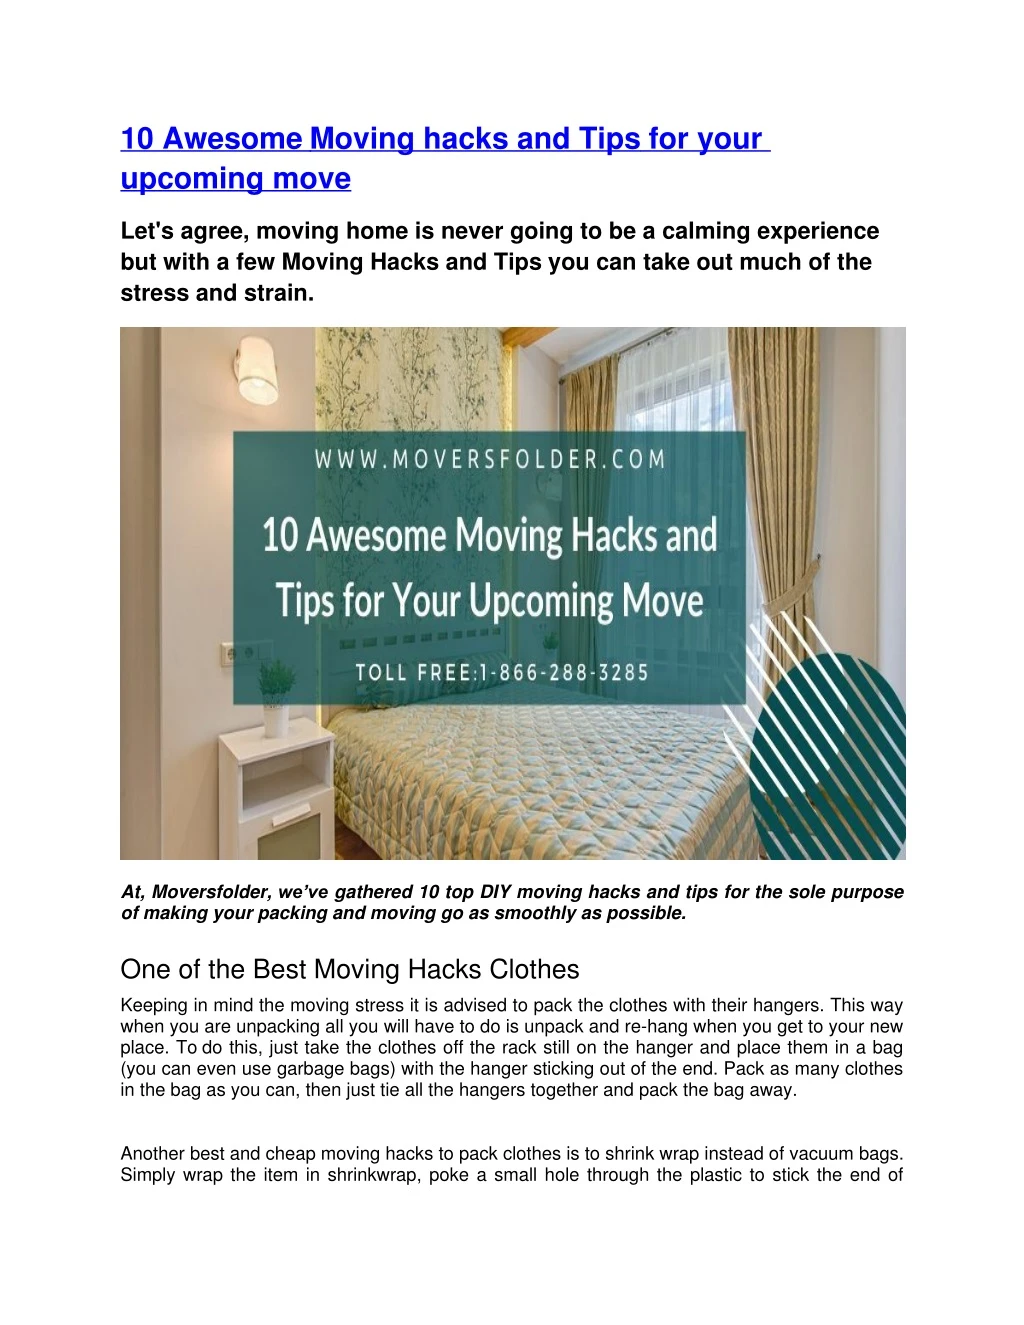 10 awesome moving hacks and tips for your